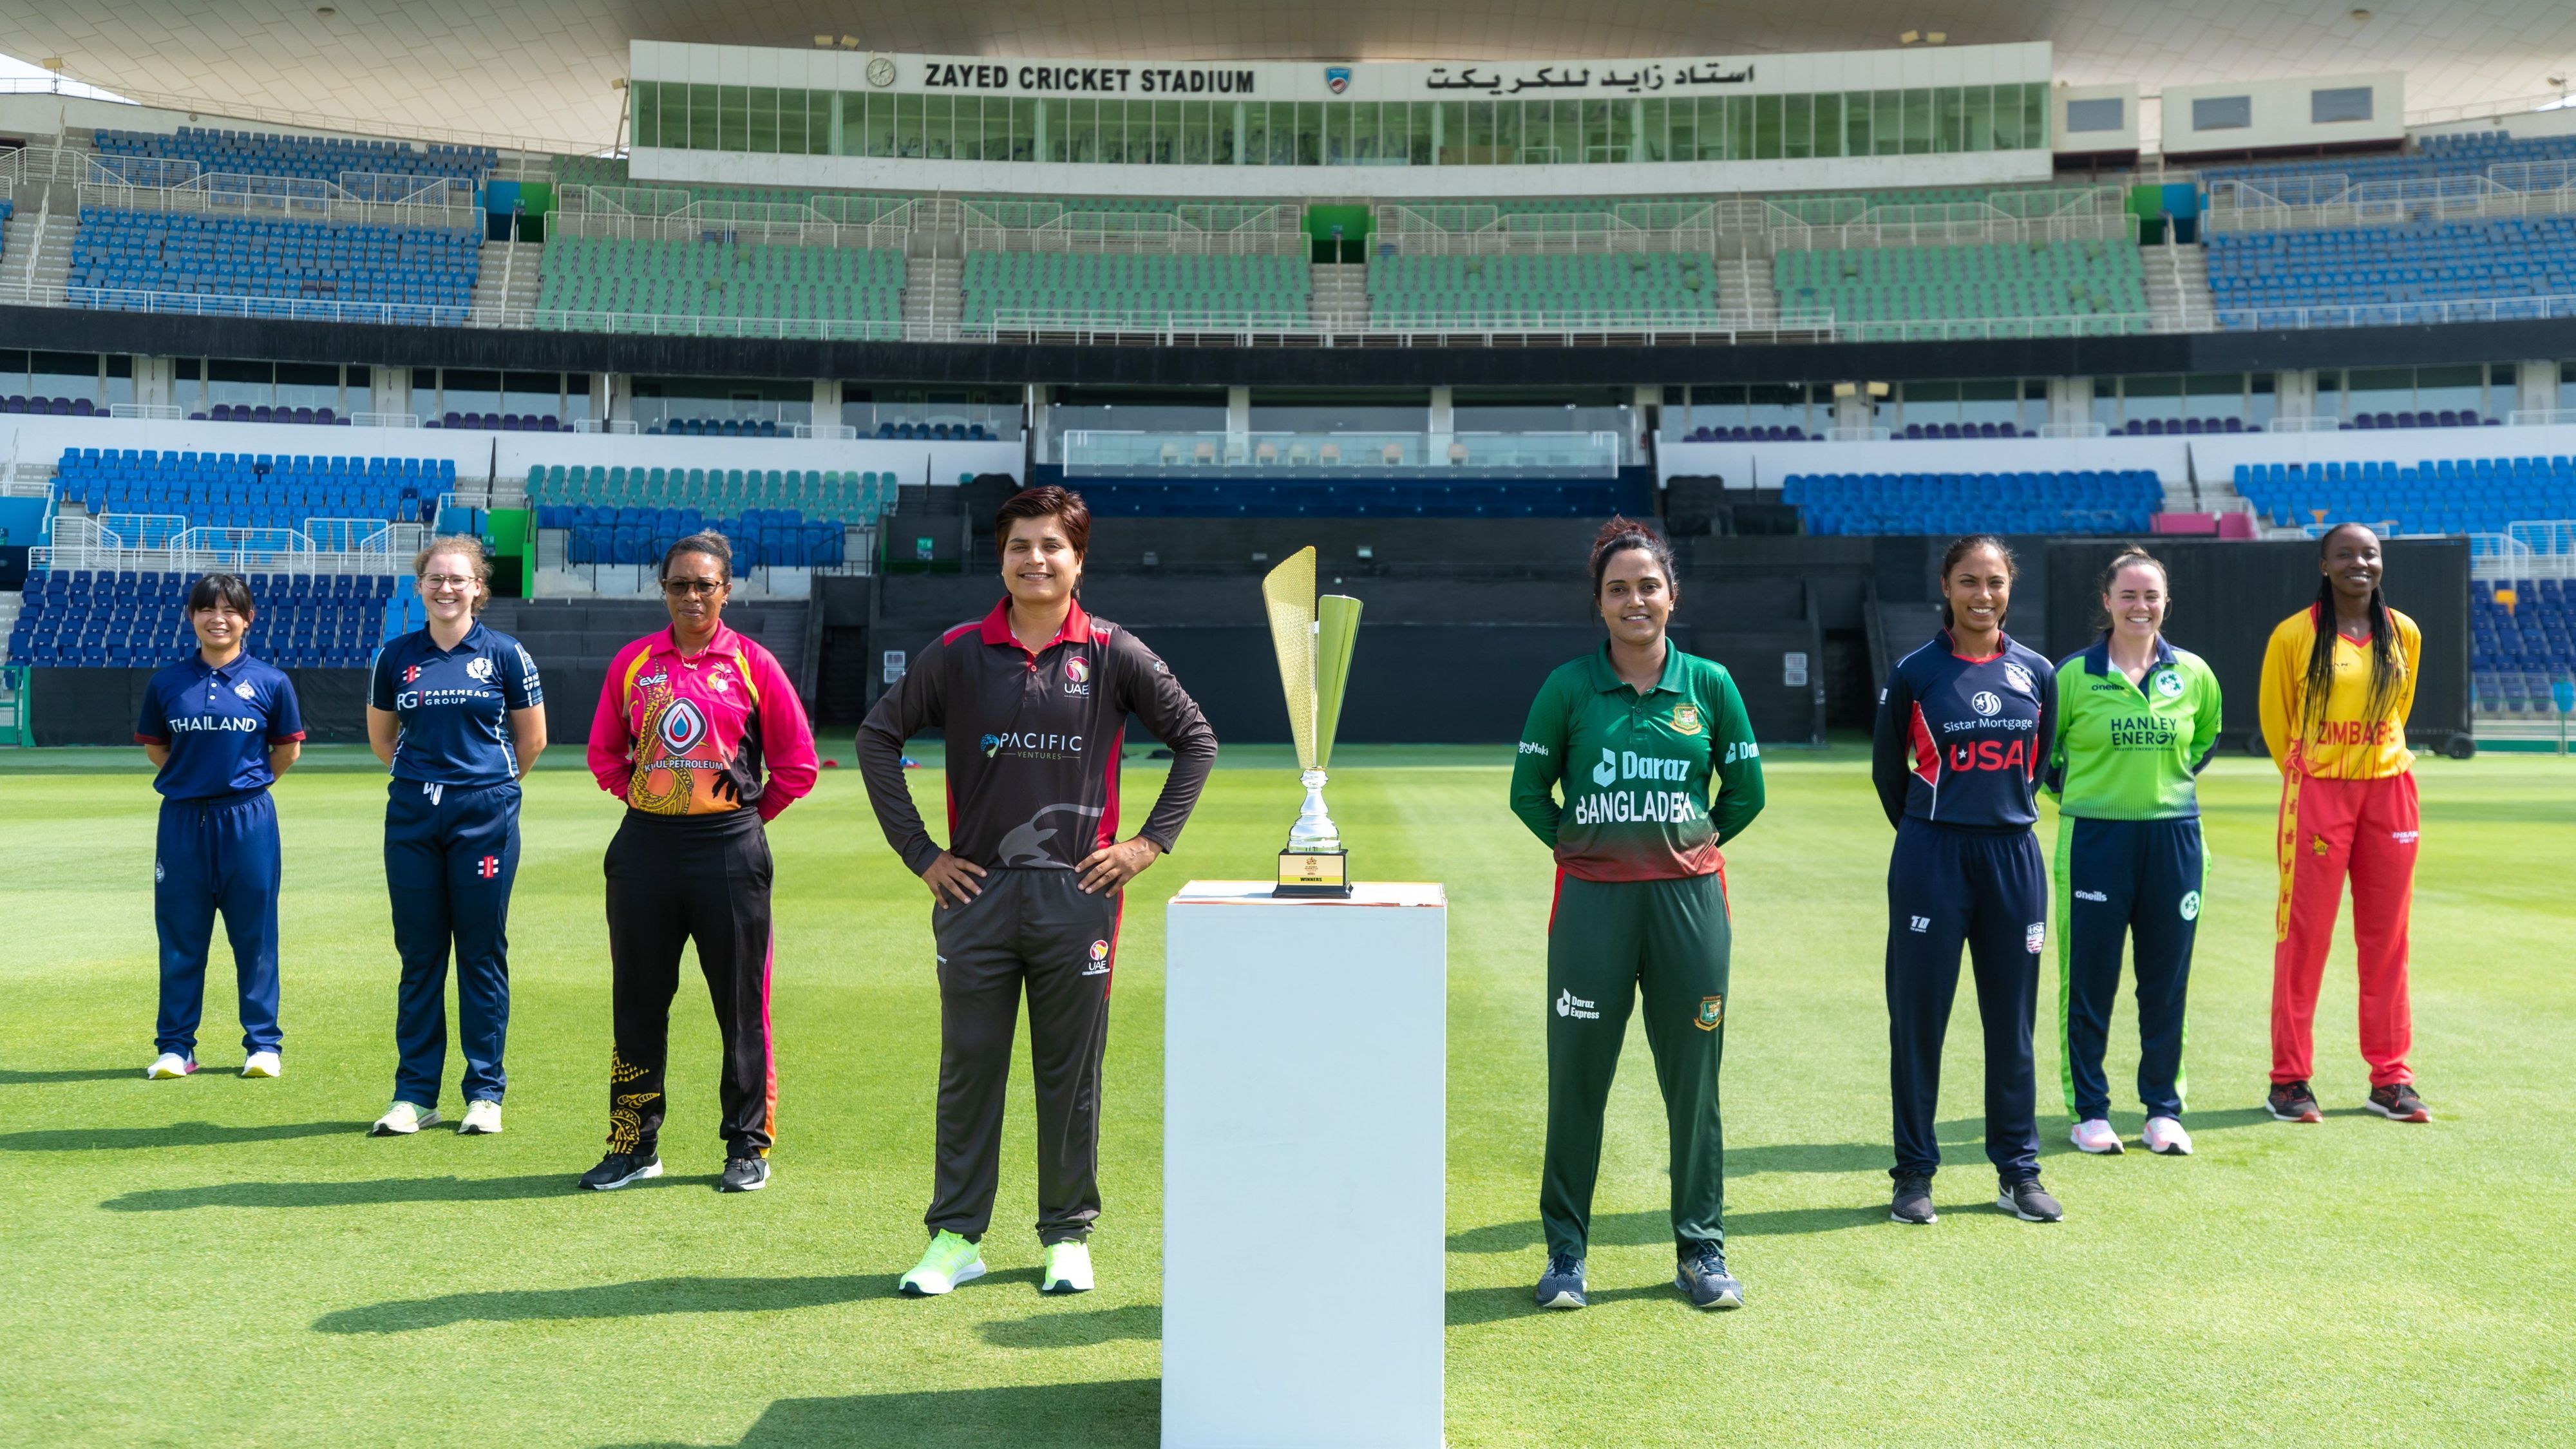 Captains look ahead to Women’s Qualifier with huge prize of South Africa 2023 at stake